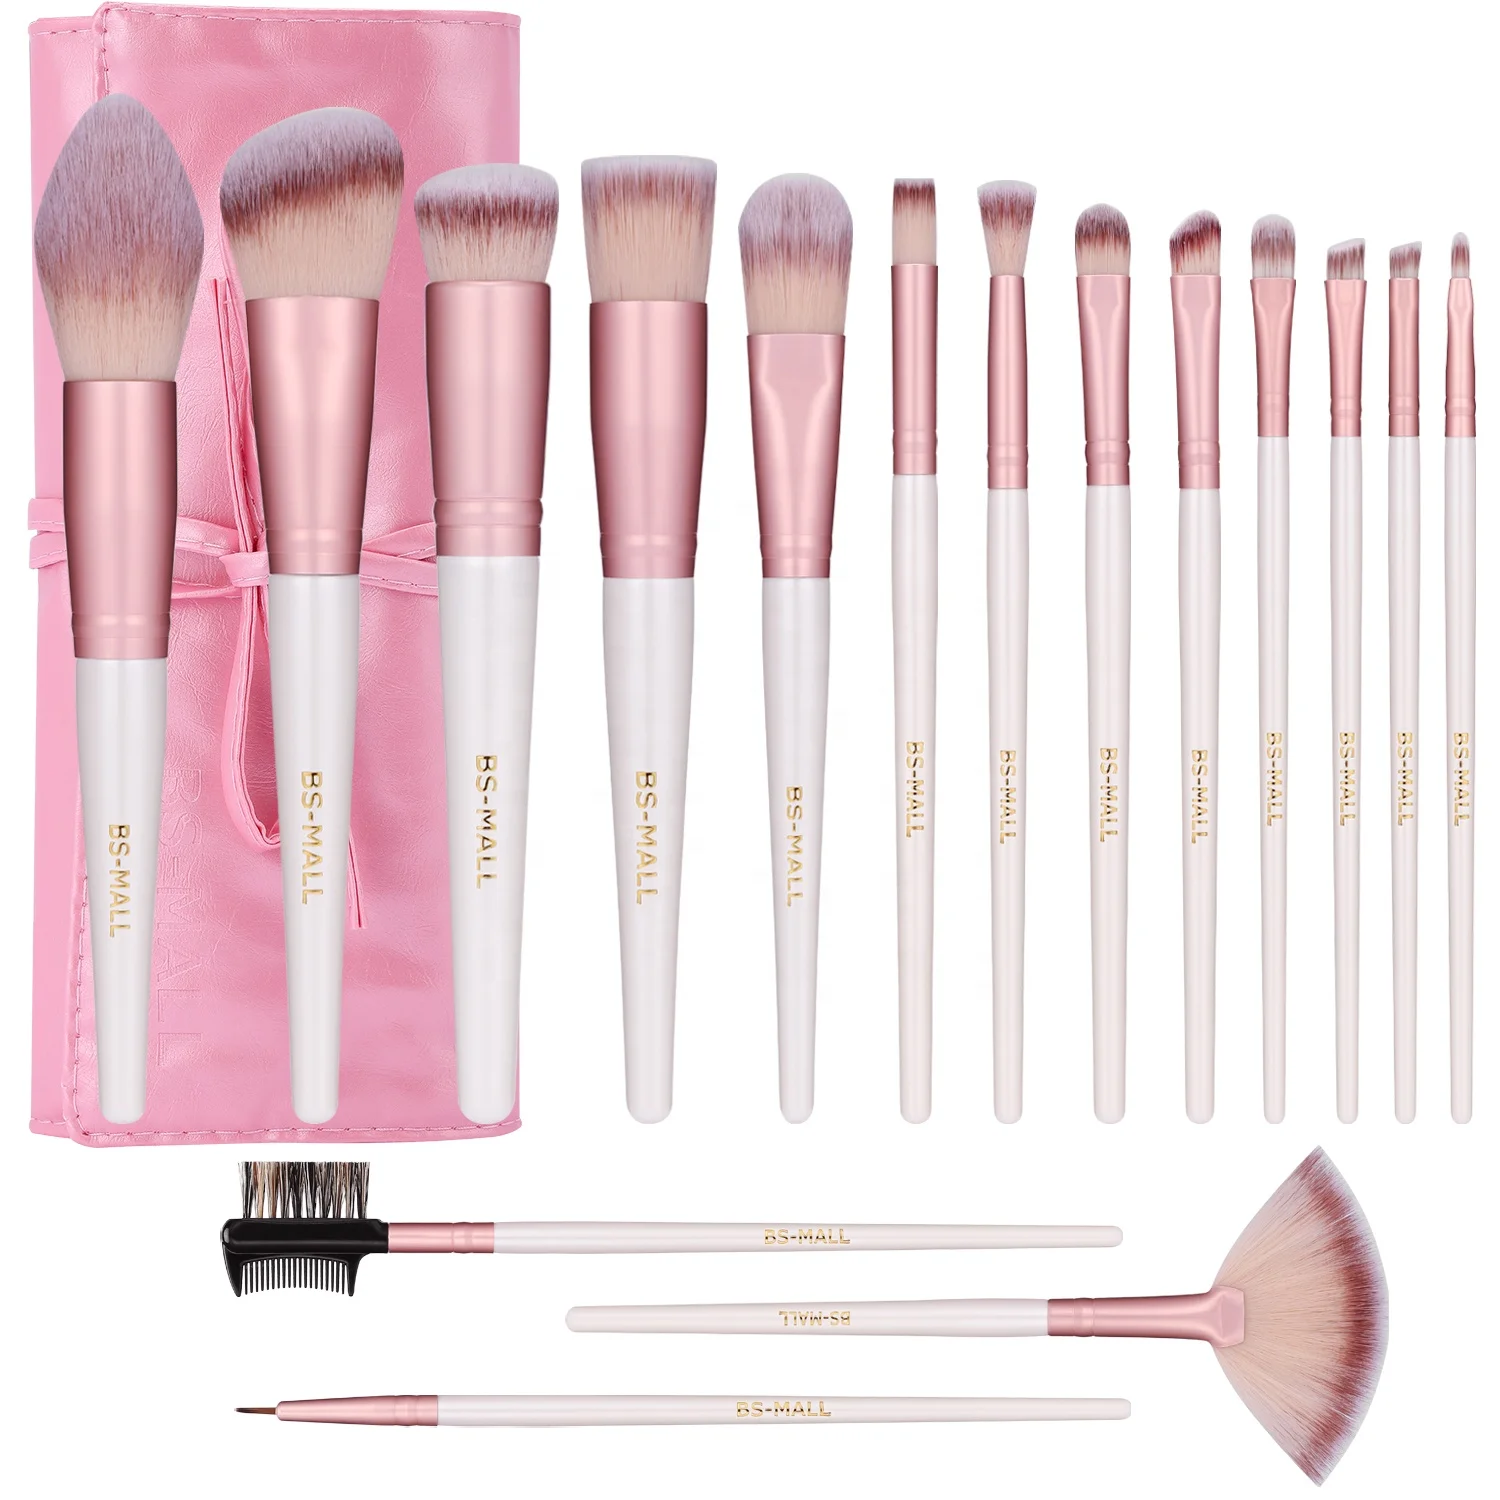 

BS-MALL Pink White Makeup brushes 16pcs China Factory Makeup Cosmetic Brushes Private Label Makeup Brush set with PU Bag, Picture or customized color